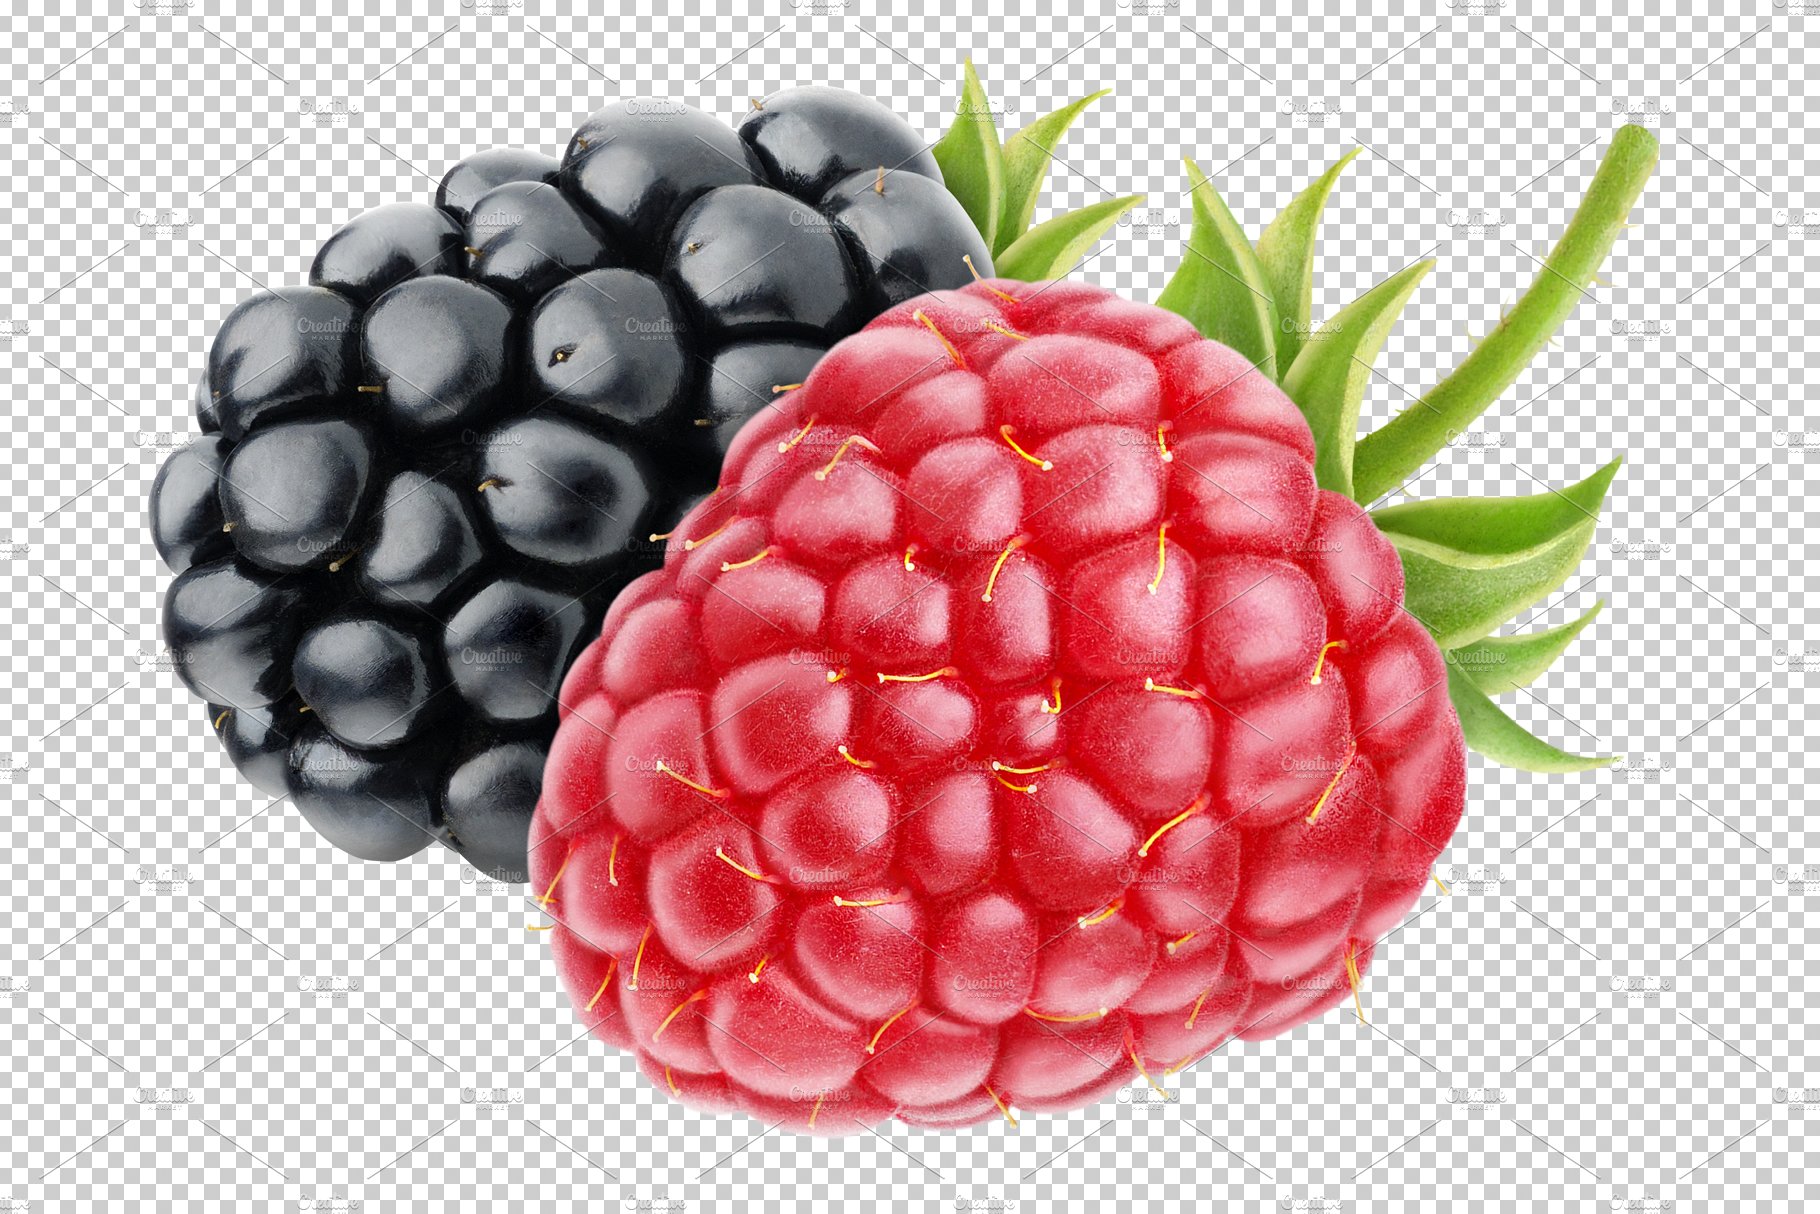 Raspberry and blackberry preview image.